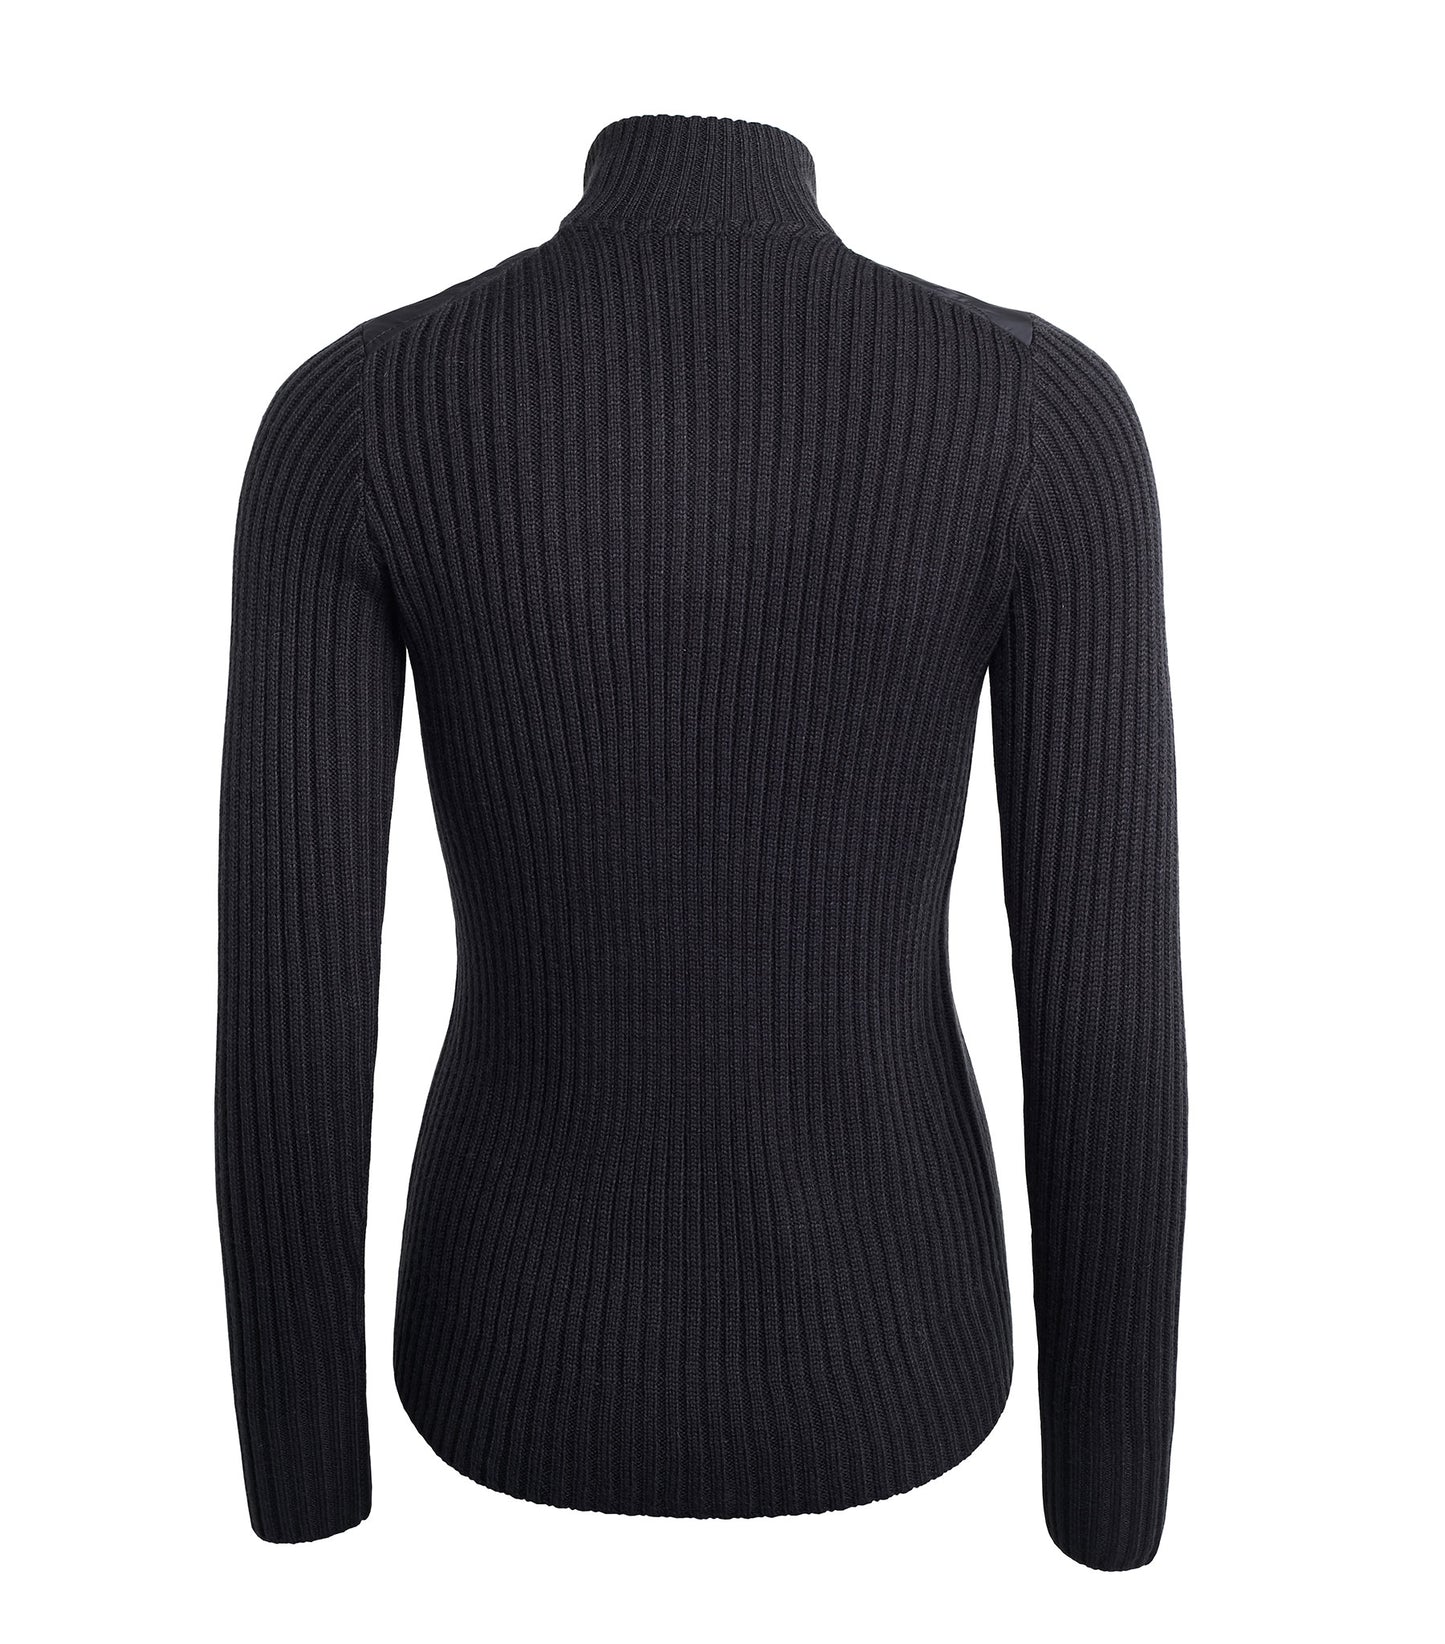 KLsaffron Ladies Knit with Padded Front